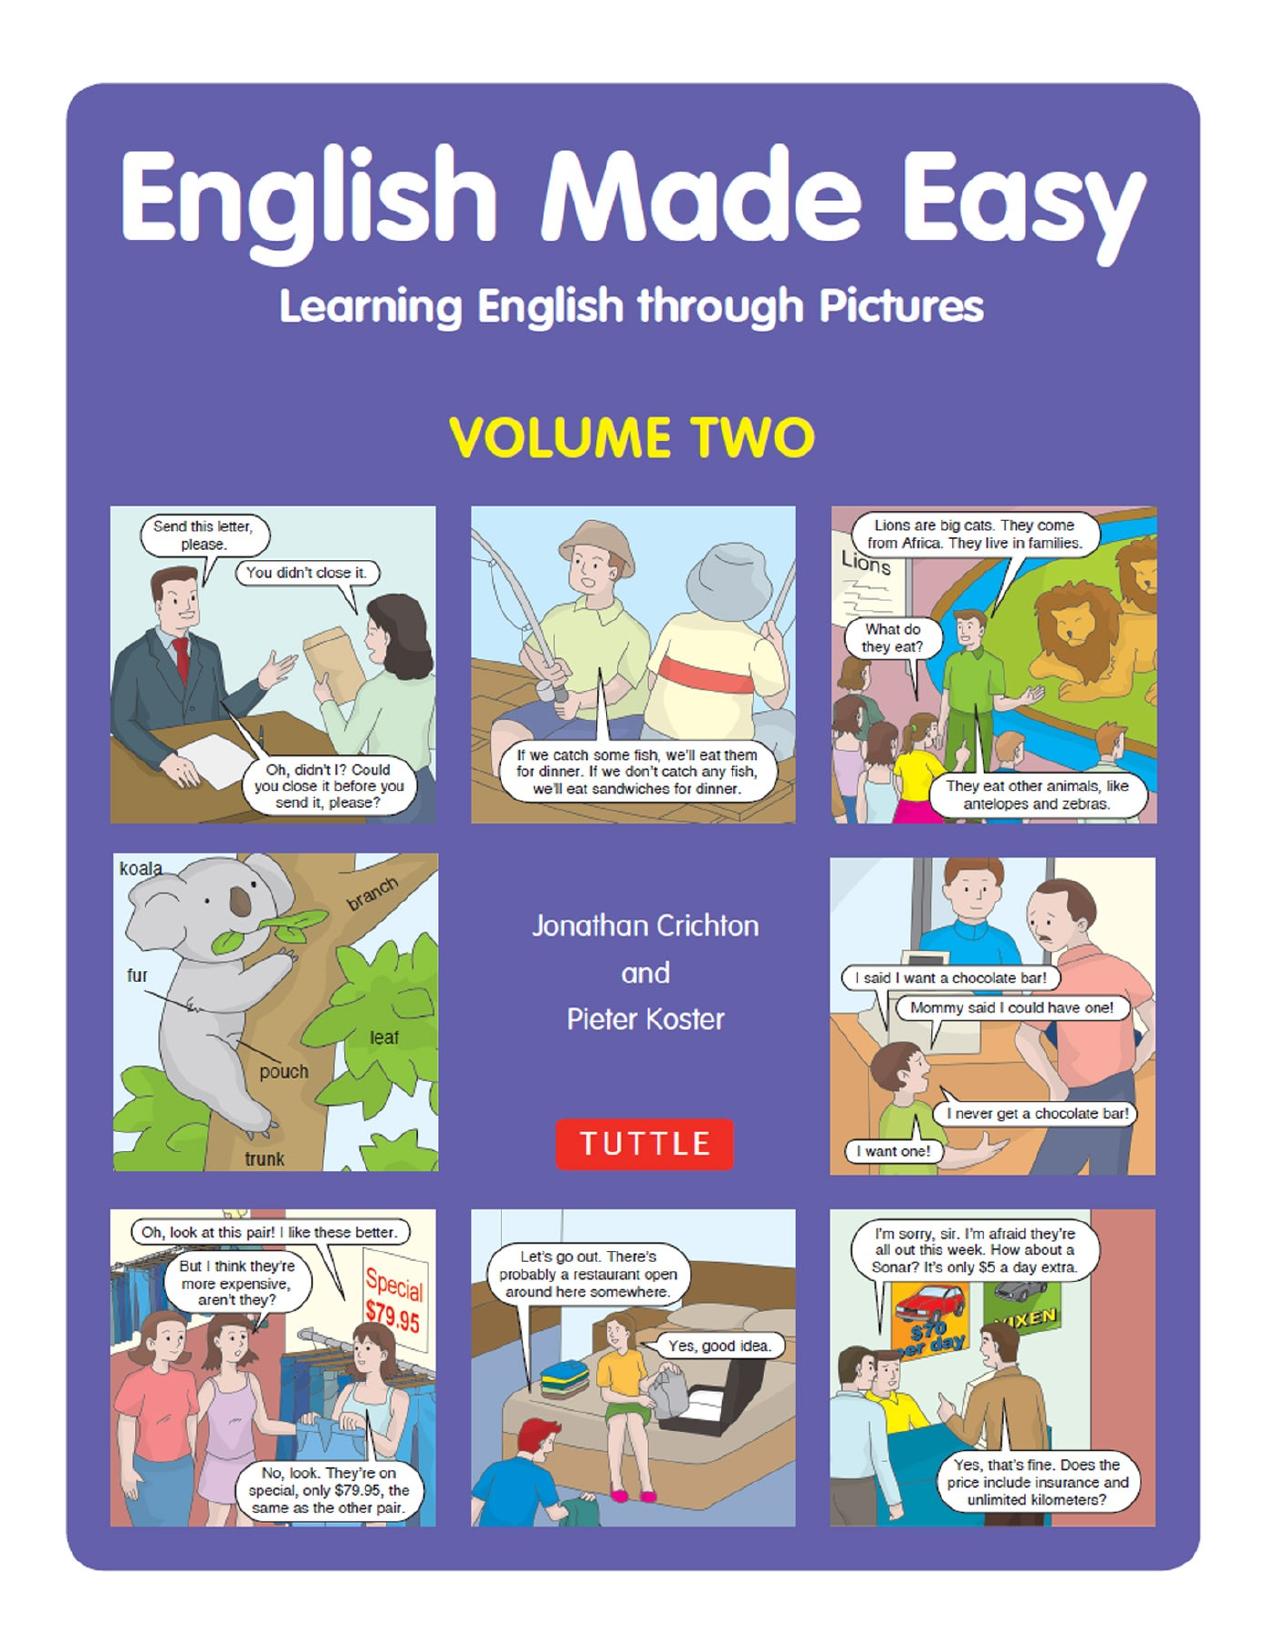 English Made Easy: Learning English through Pictures \(Volume Two\) - PDFDrive.com